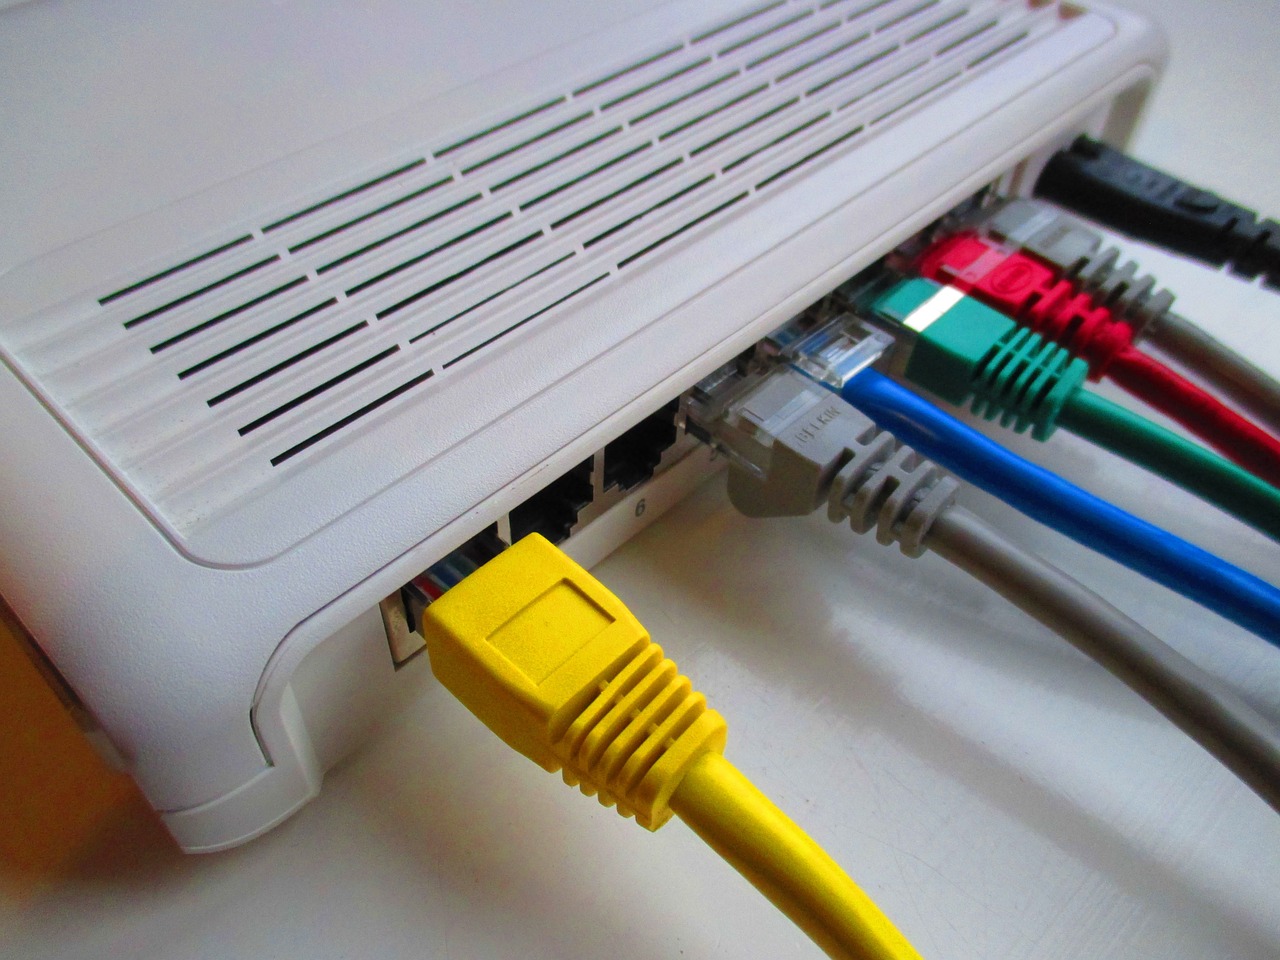 Web Security 101 - How Secure Is Your Home Router | IntelliTeK Managed IT Services Sydney Australia